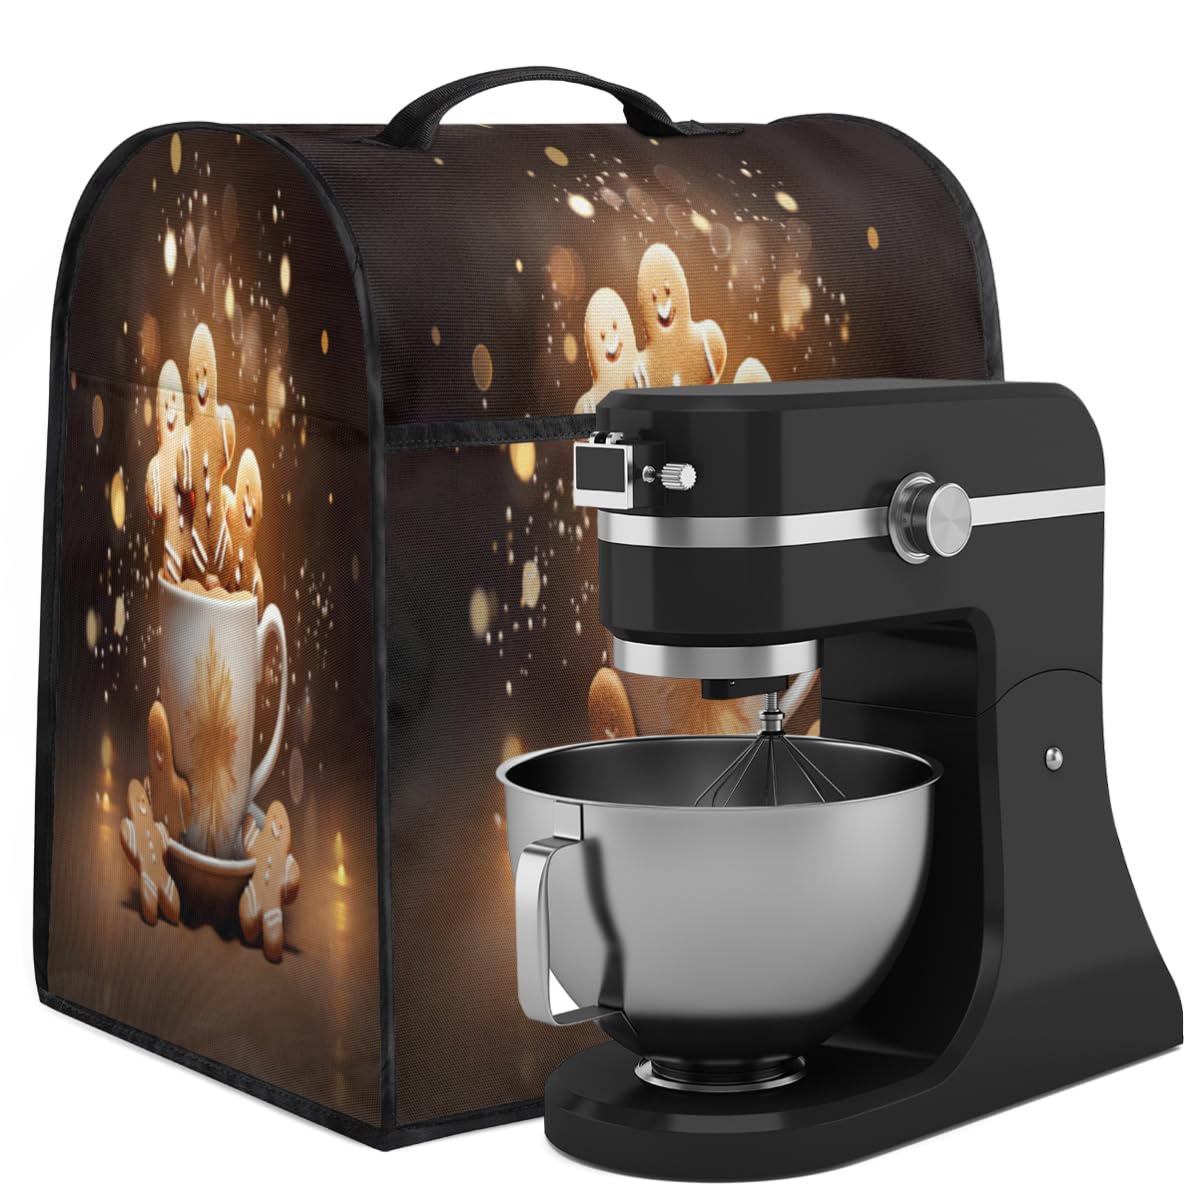 Christmas Cup With Gingerbread Men (5) Coffee Maker Dust Cover Mixer Cover with Pockets and Top Handle Toaster Covers Bread Machine Covers for Kitchen Cafe Bar Home Decor